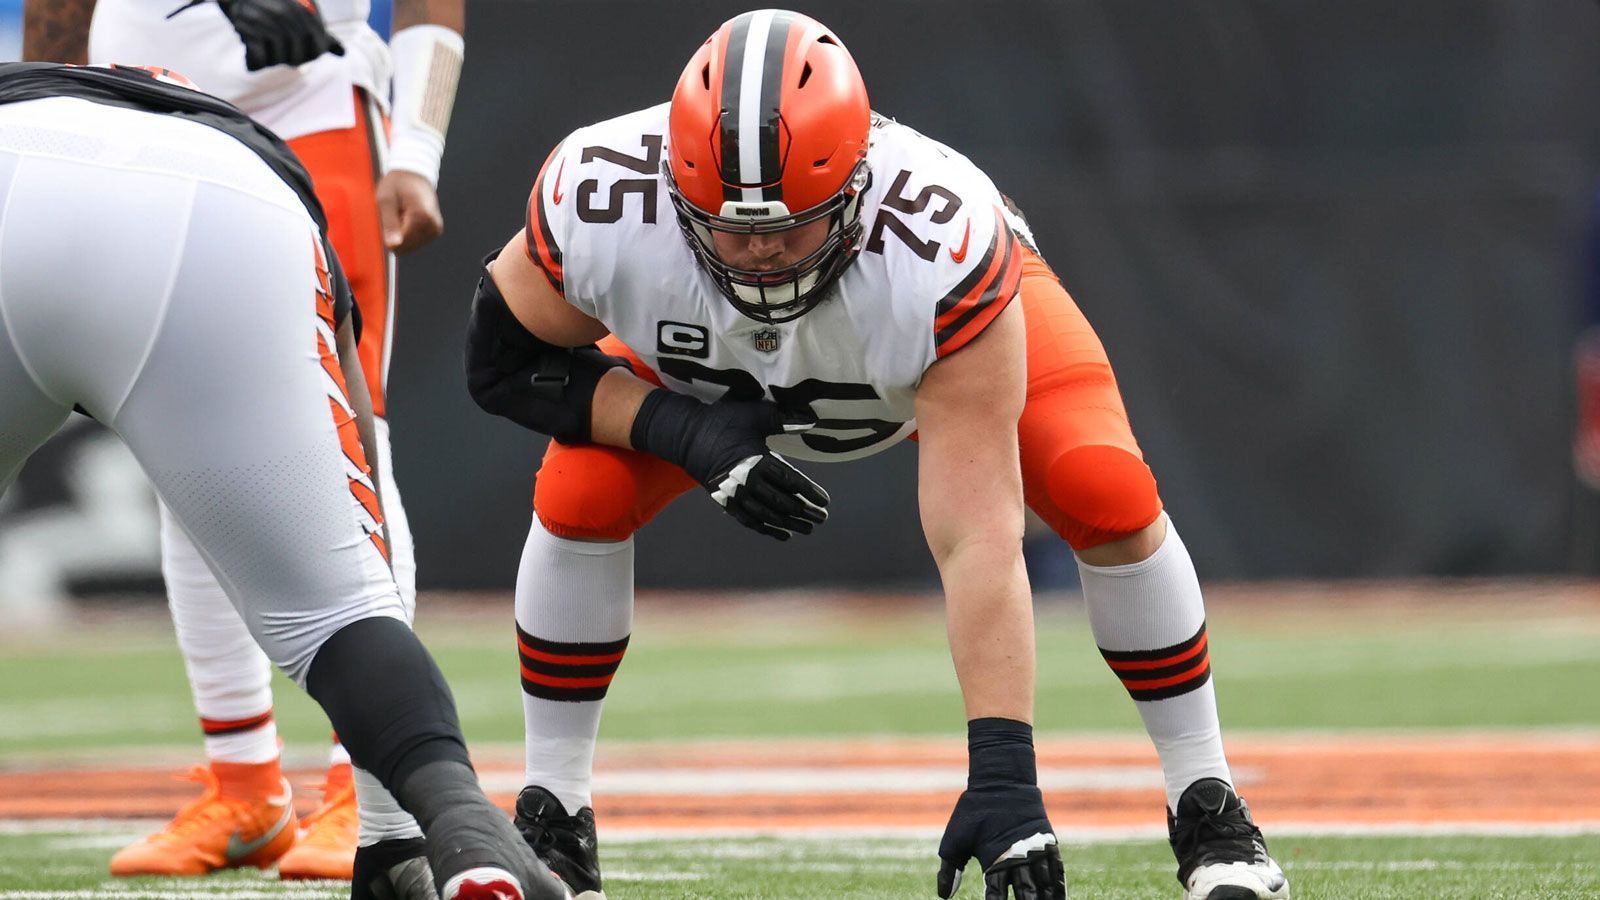 
                <strong>Offense: Left Guards</strong><br>
                &#x2022; Joel Bitonio (Cleveland Browns)<br>&#x2022; Joe Thuney (Kansas City Chiefs)<br>&#x2022; Quenton Nelson (Indianapolis Colts)<br>&#x2022; Landon Dickerson (Philadelphia Eagles)<br>&#x2022; Elgton Jenkins (Green Bay Packers)<br>
              